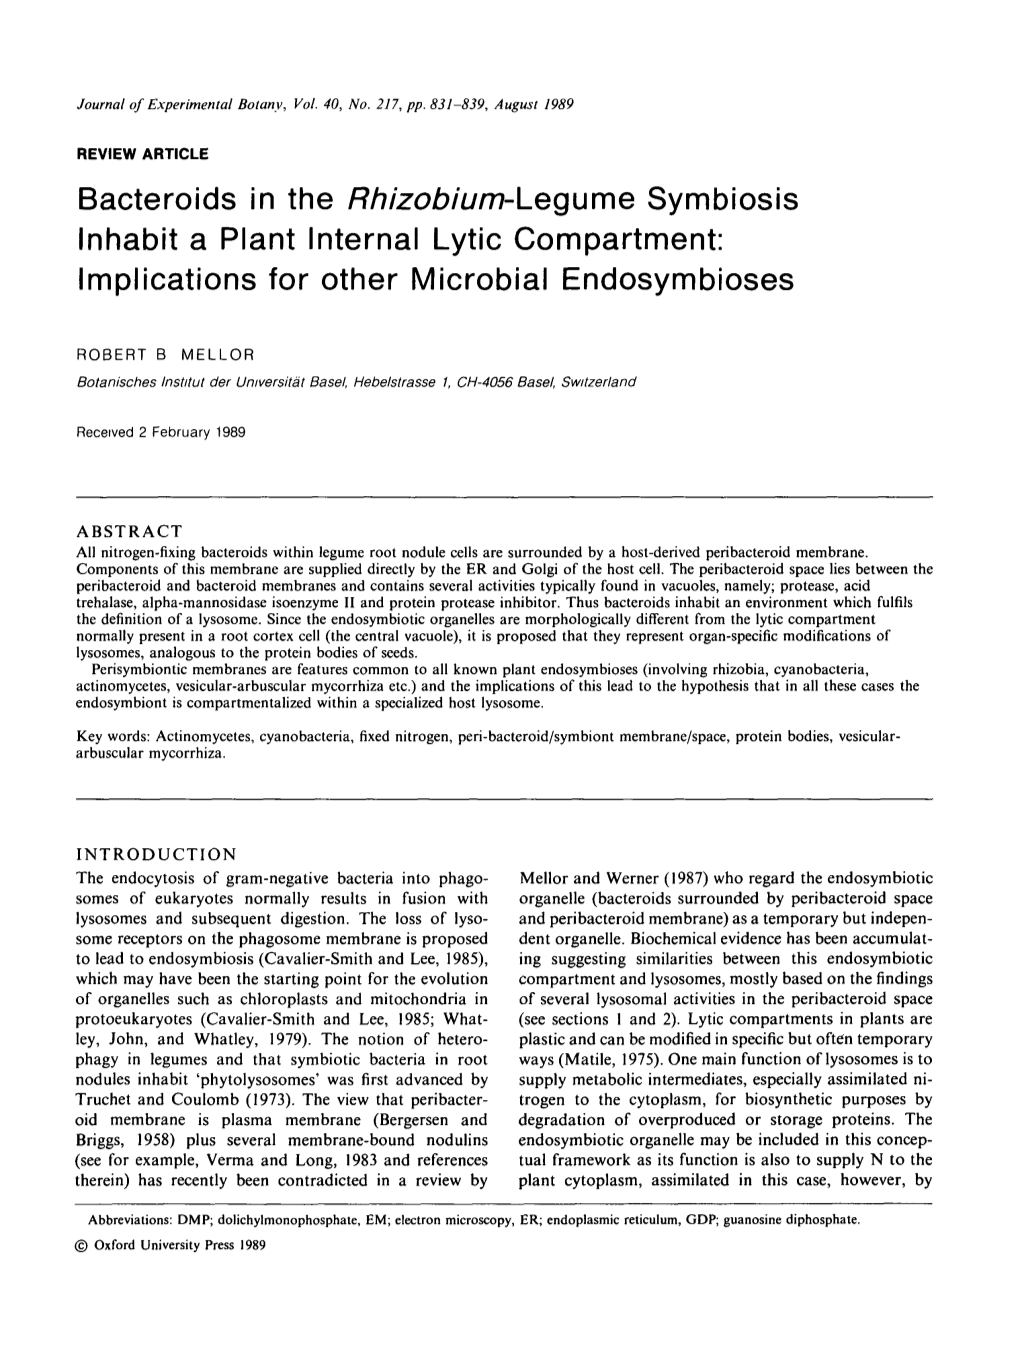 Bacteroids in the Rhizobium-Legume Symbiosis Inhabit a Plant Internal Lytic Compartment: Implications for Other Microbial Endosymbioses